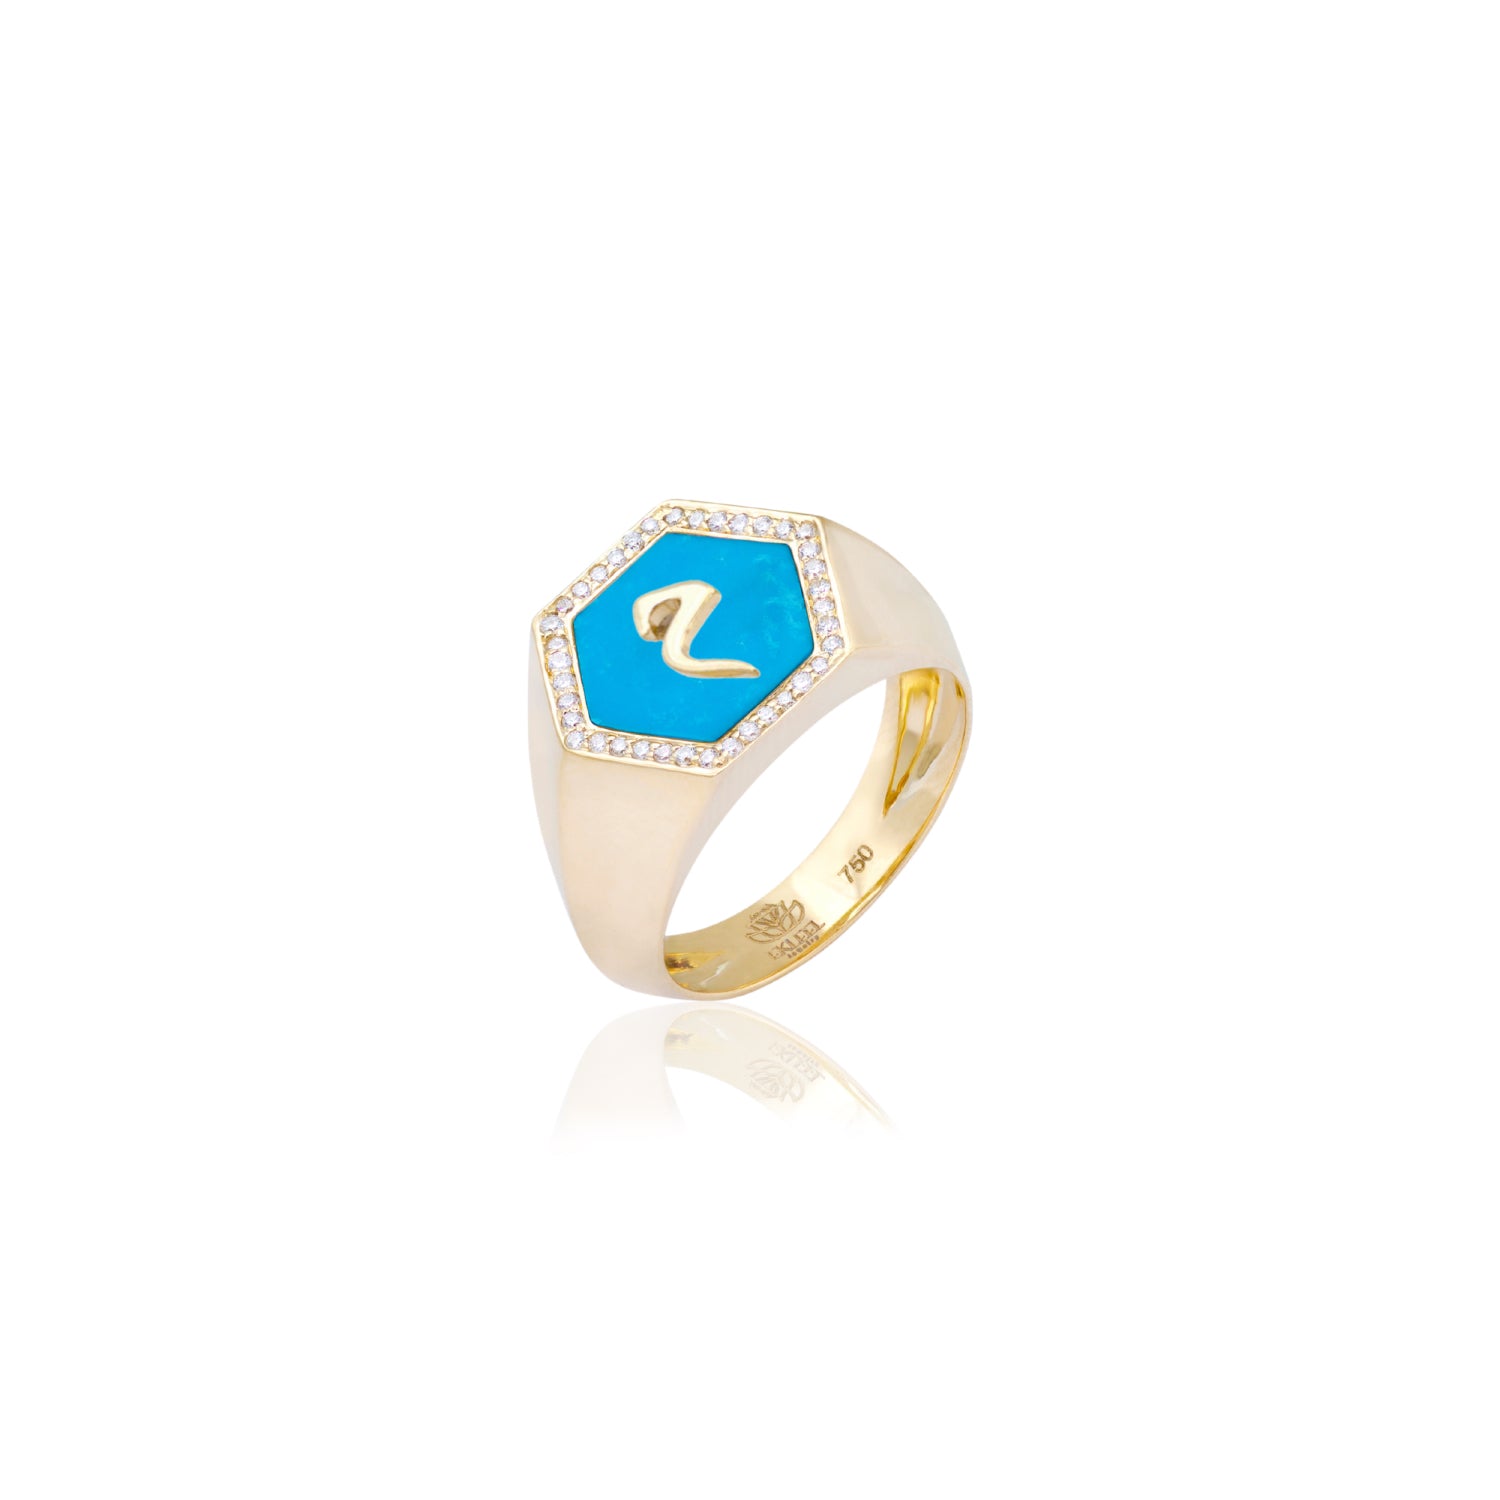 Qamoos 2.0 Letter م Turquoise and Diamond Signet Ring in Yellow Gold